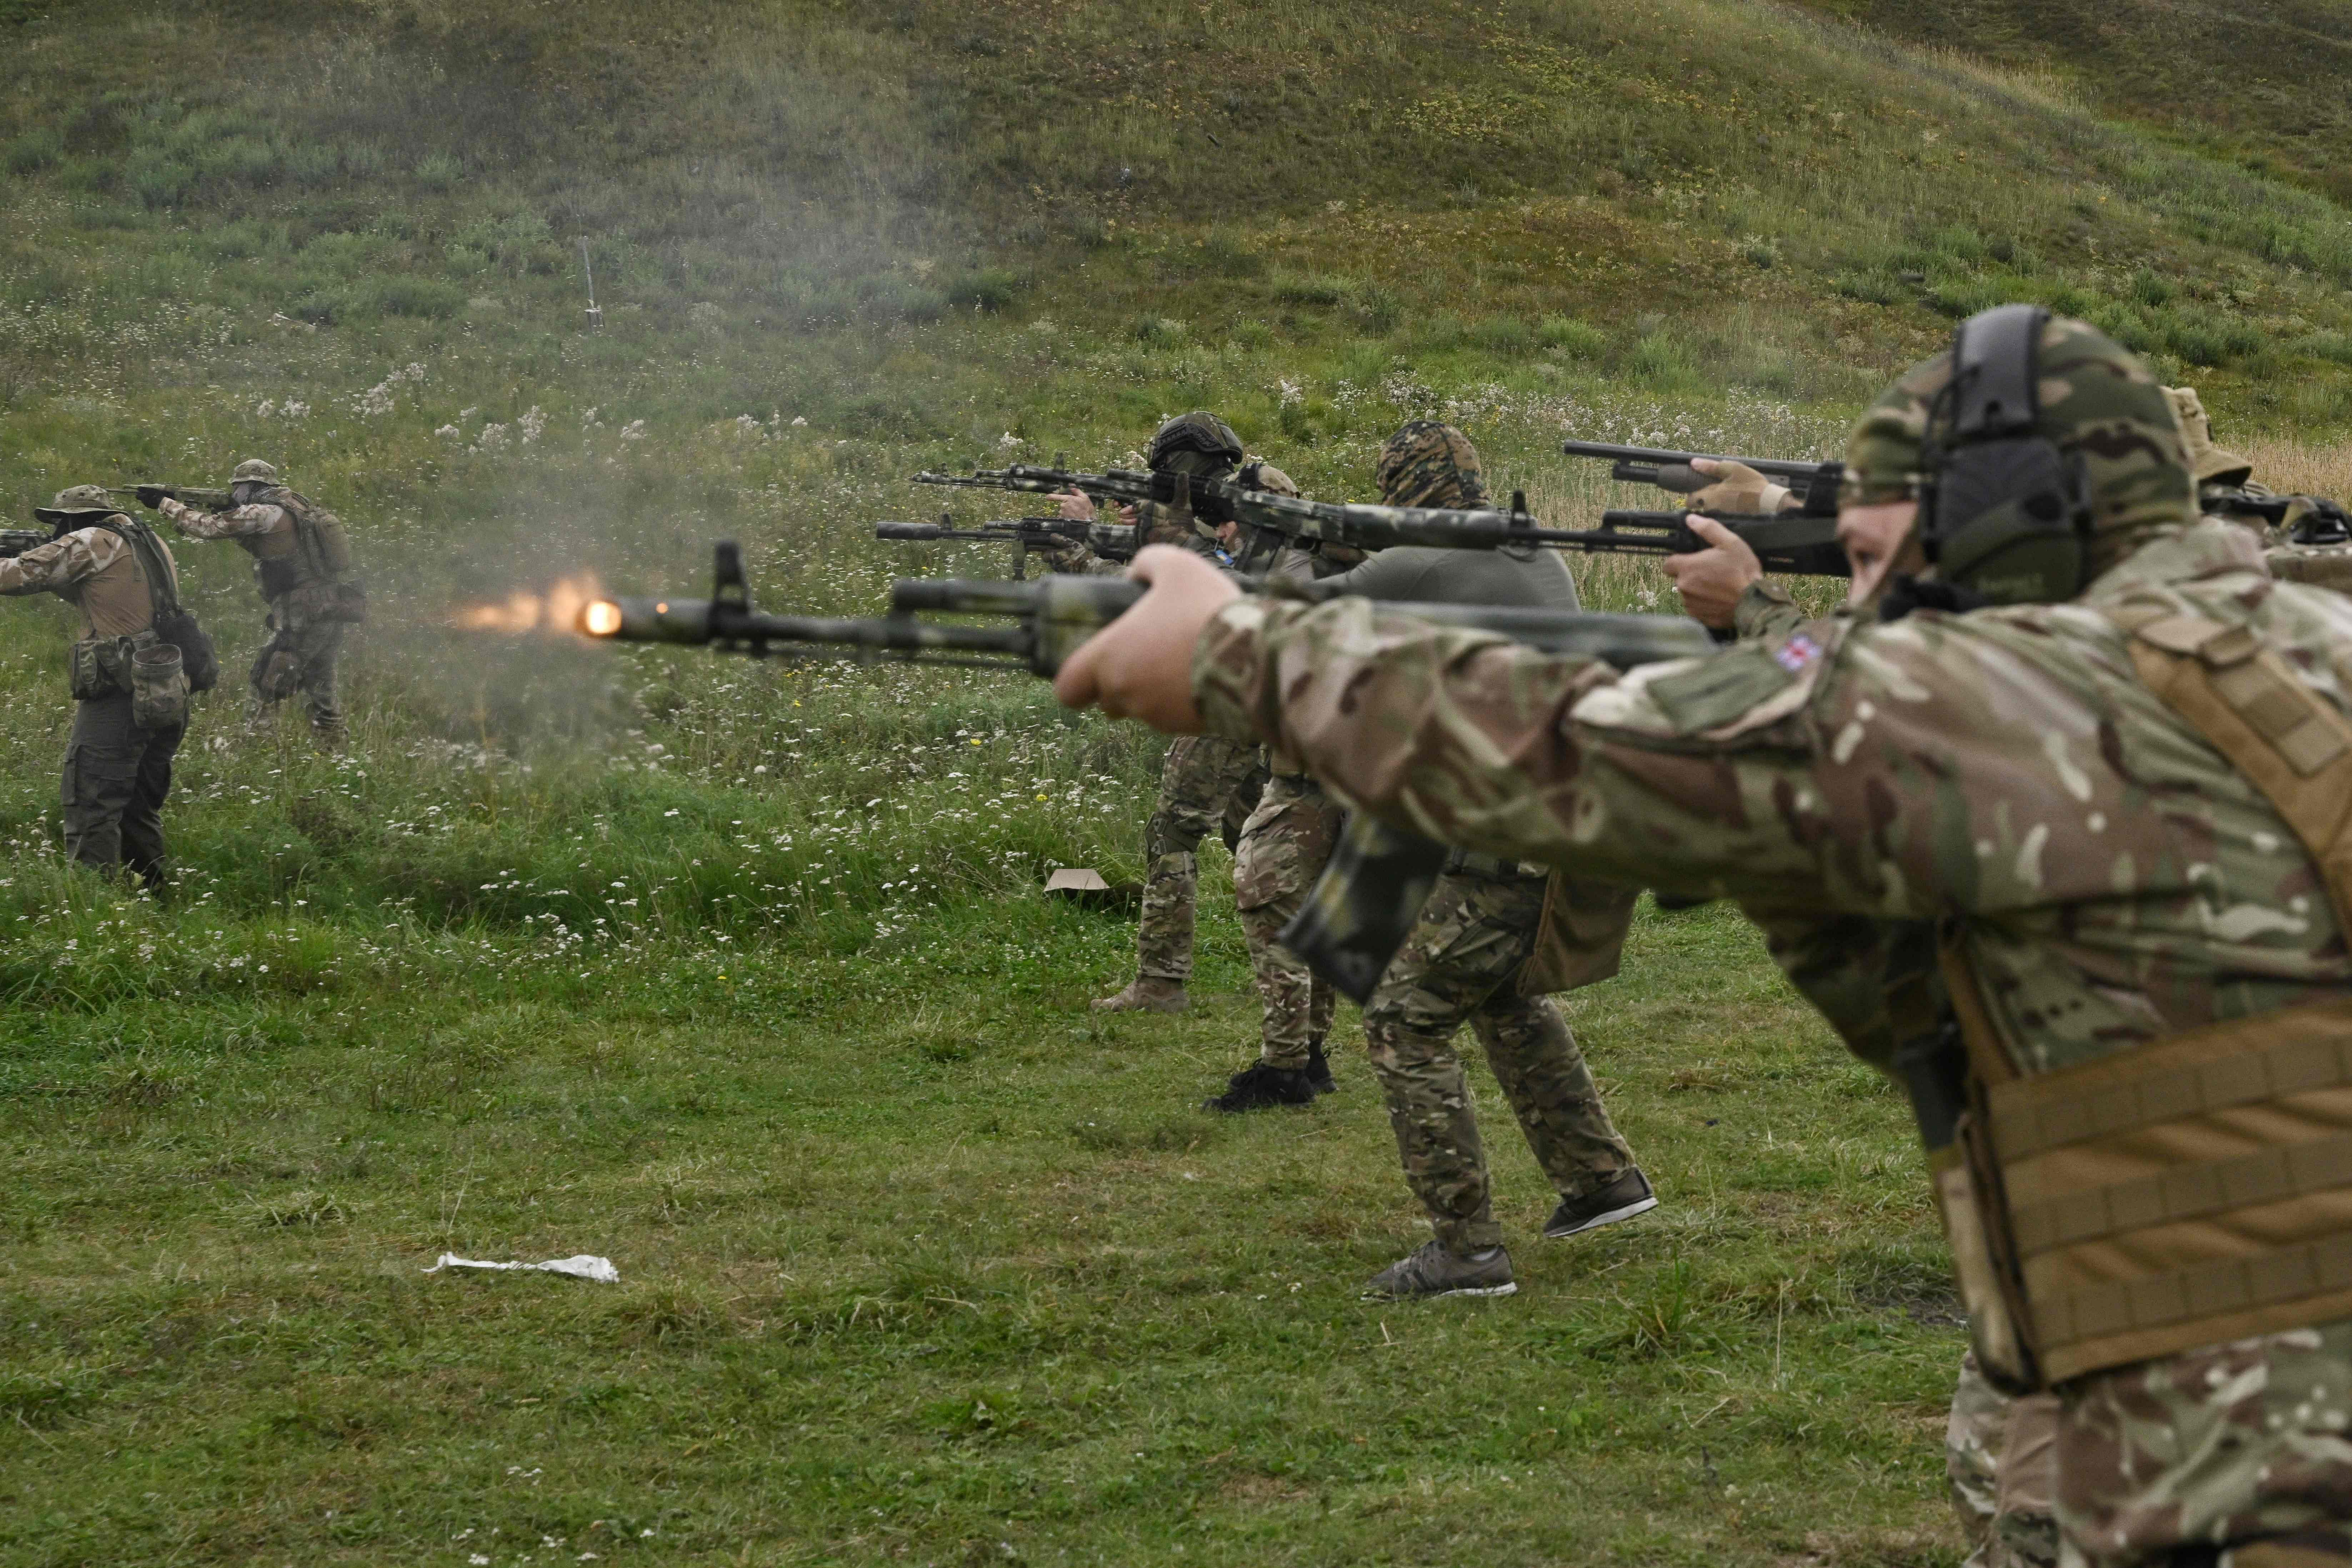 New members of the Dzhokhar Dudayev Chechen volunteer battalion take part in a training session in the Kyiv region. Credit: AFP Photo